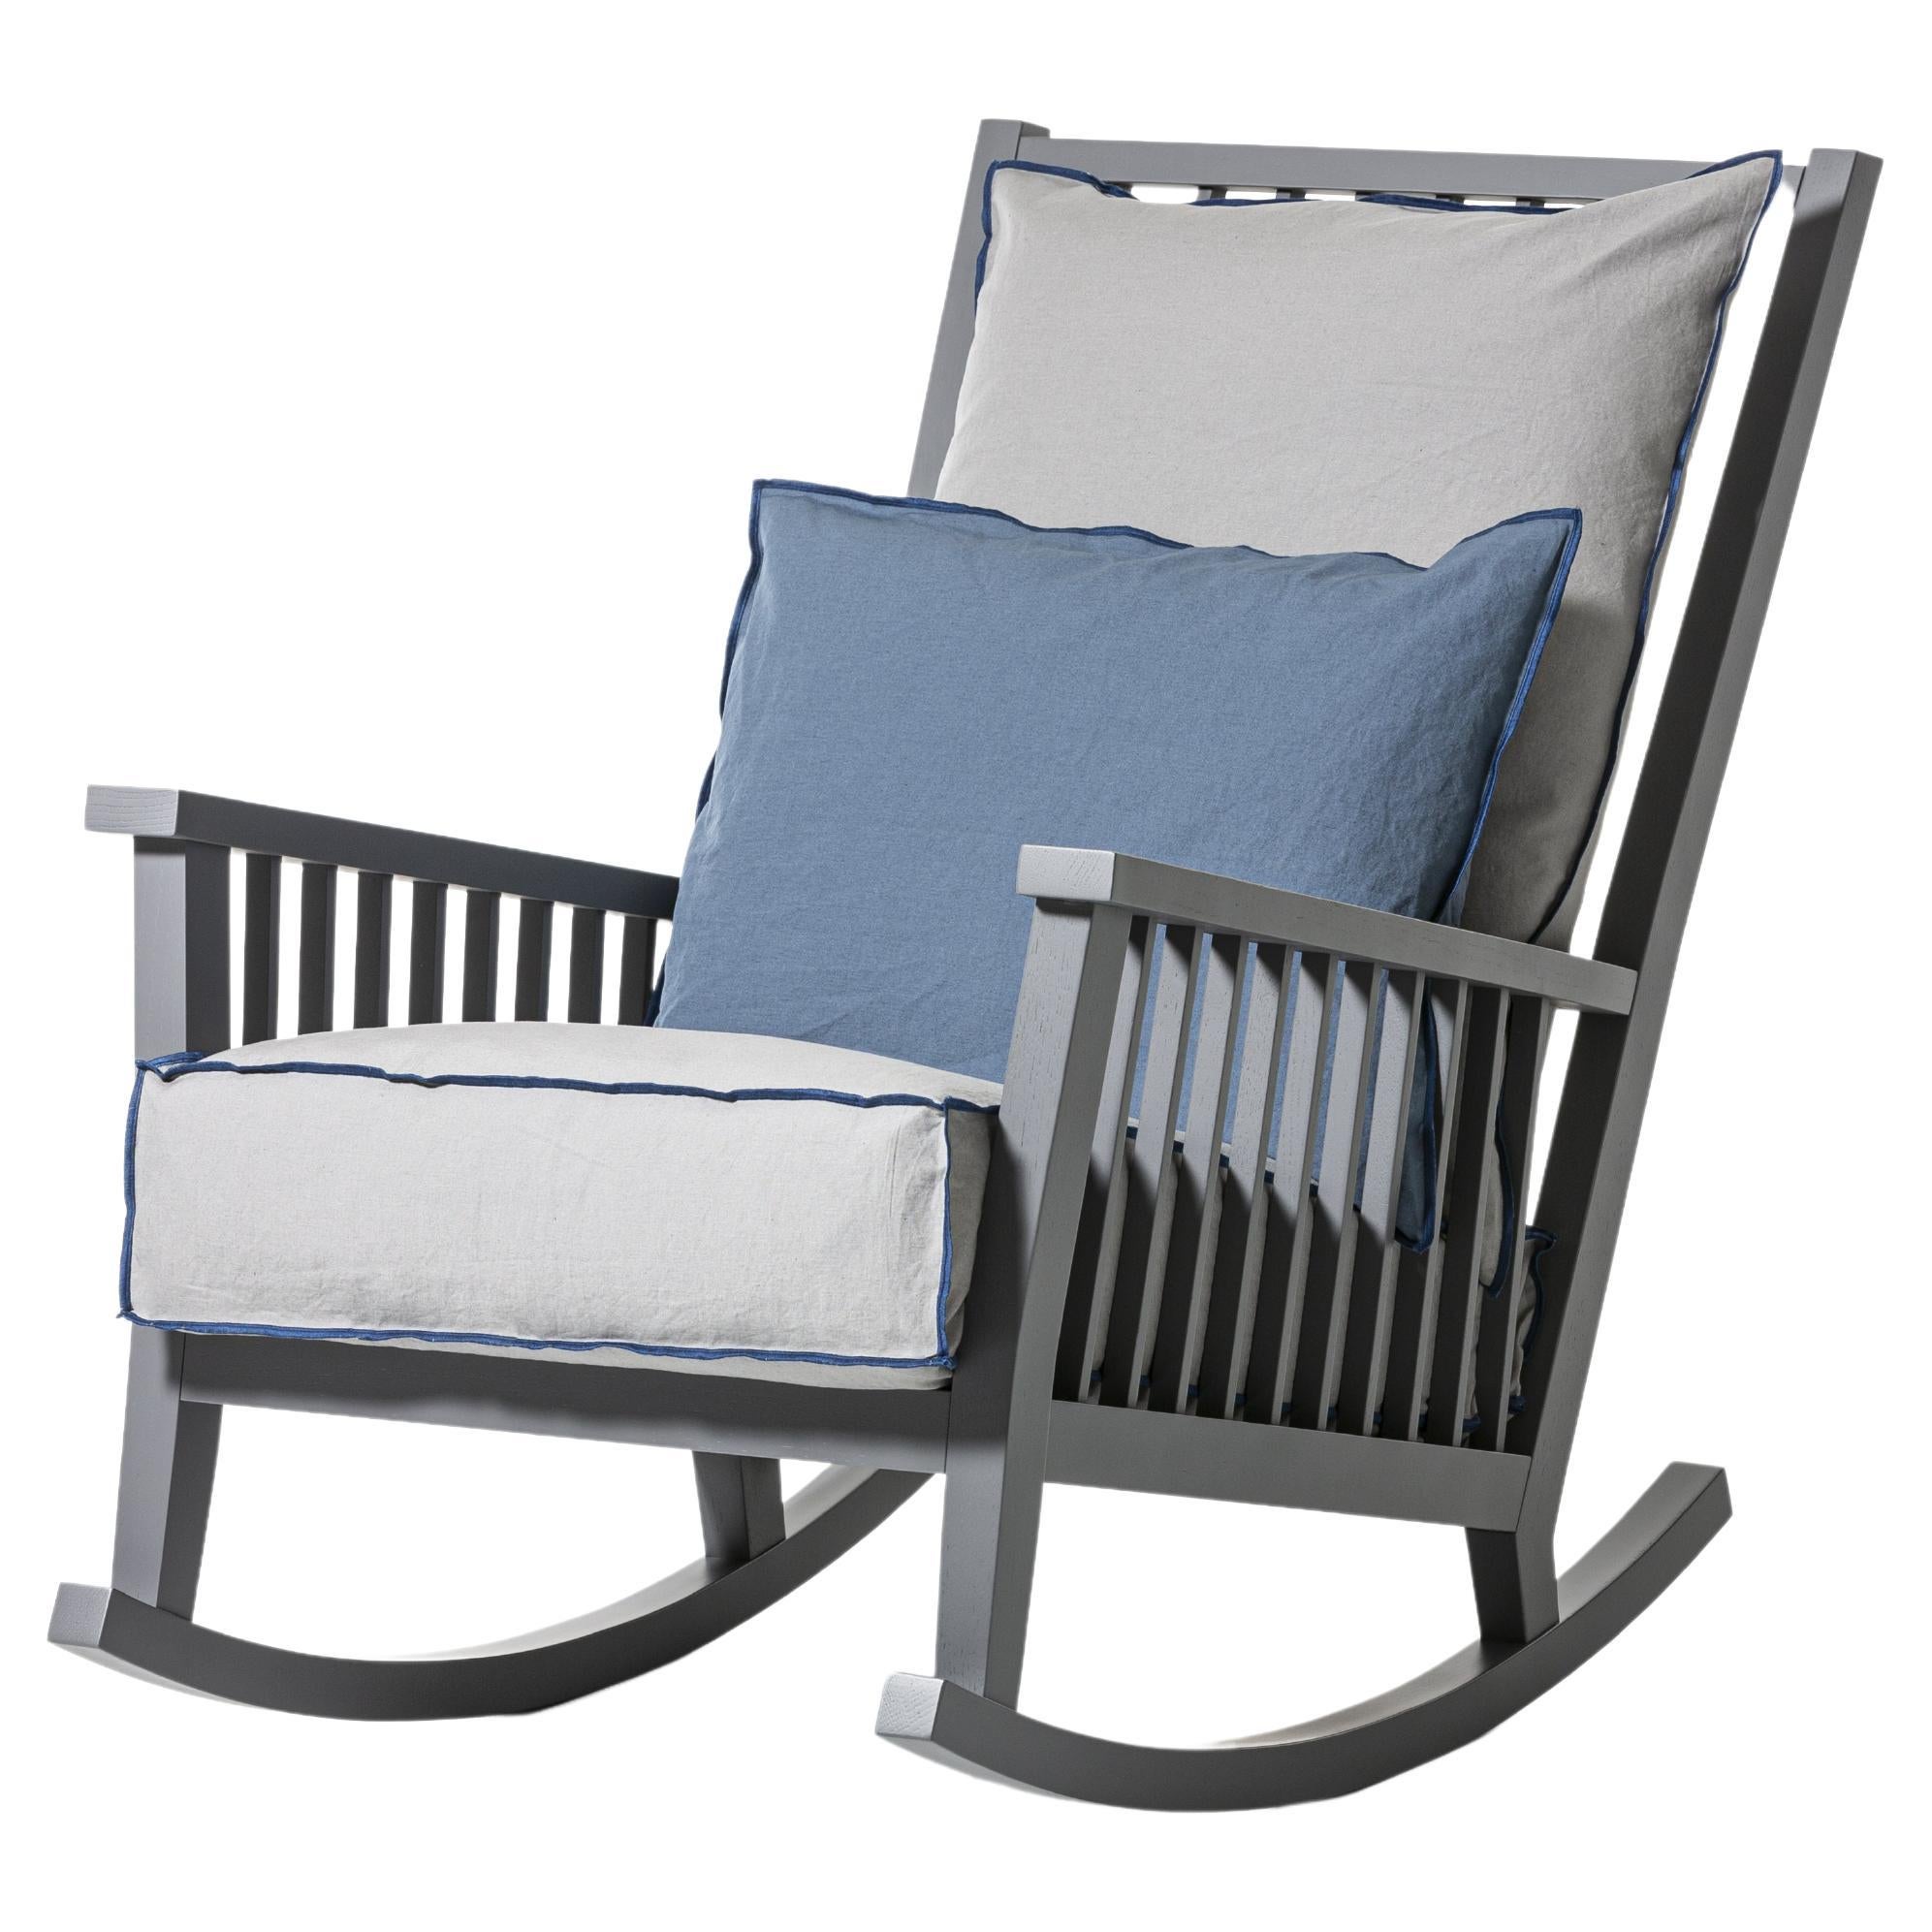 Gervasoni Gray 09 Rocking Chair in Grey Oak with Fog Upholstery by Paola Navone For Sale